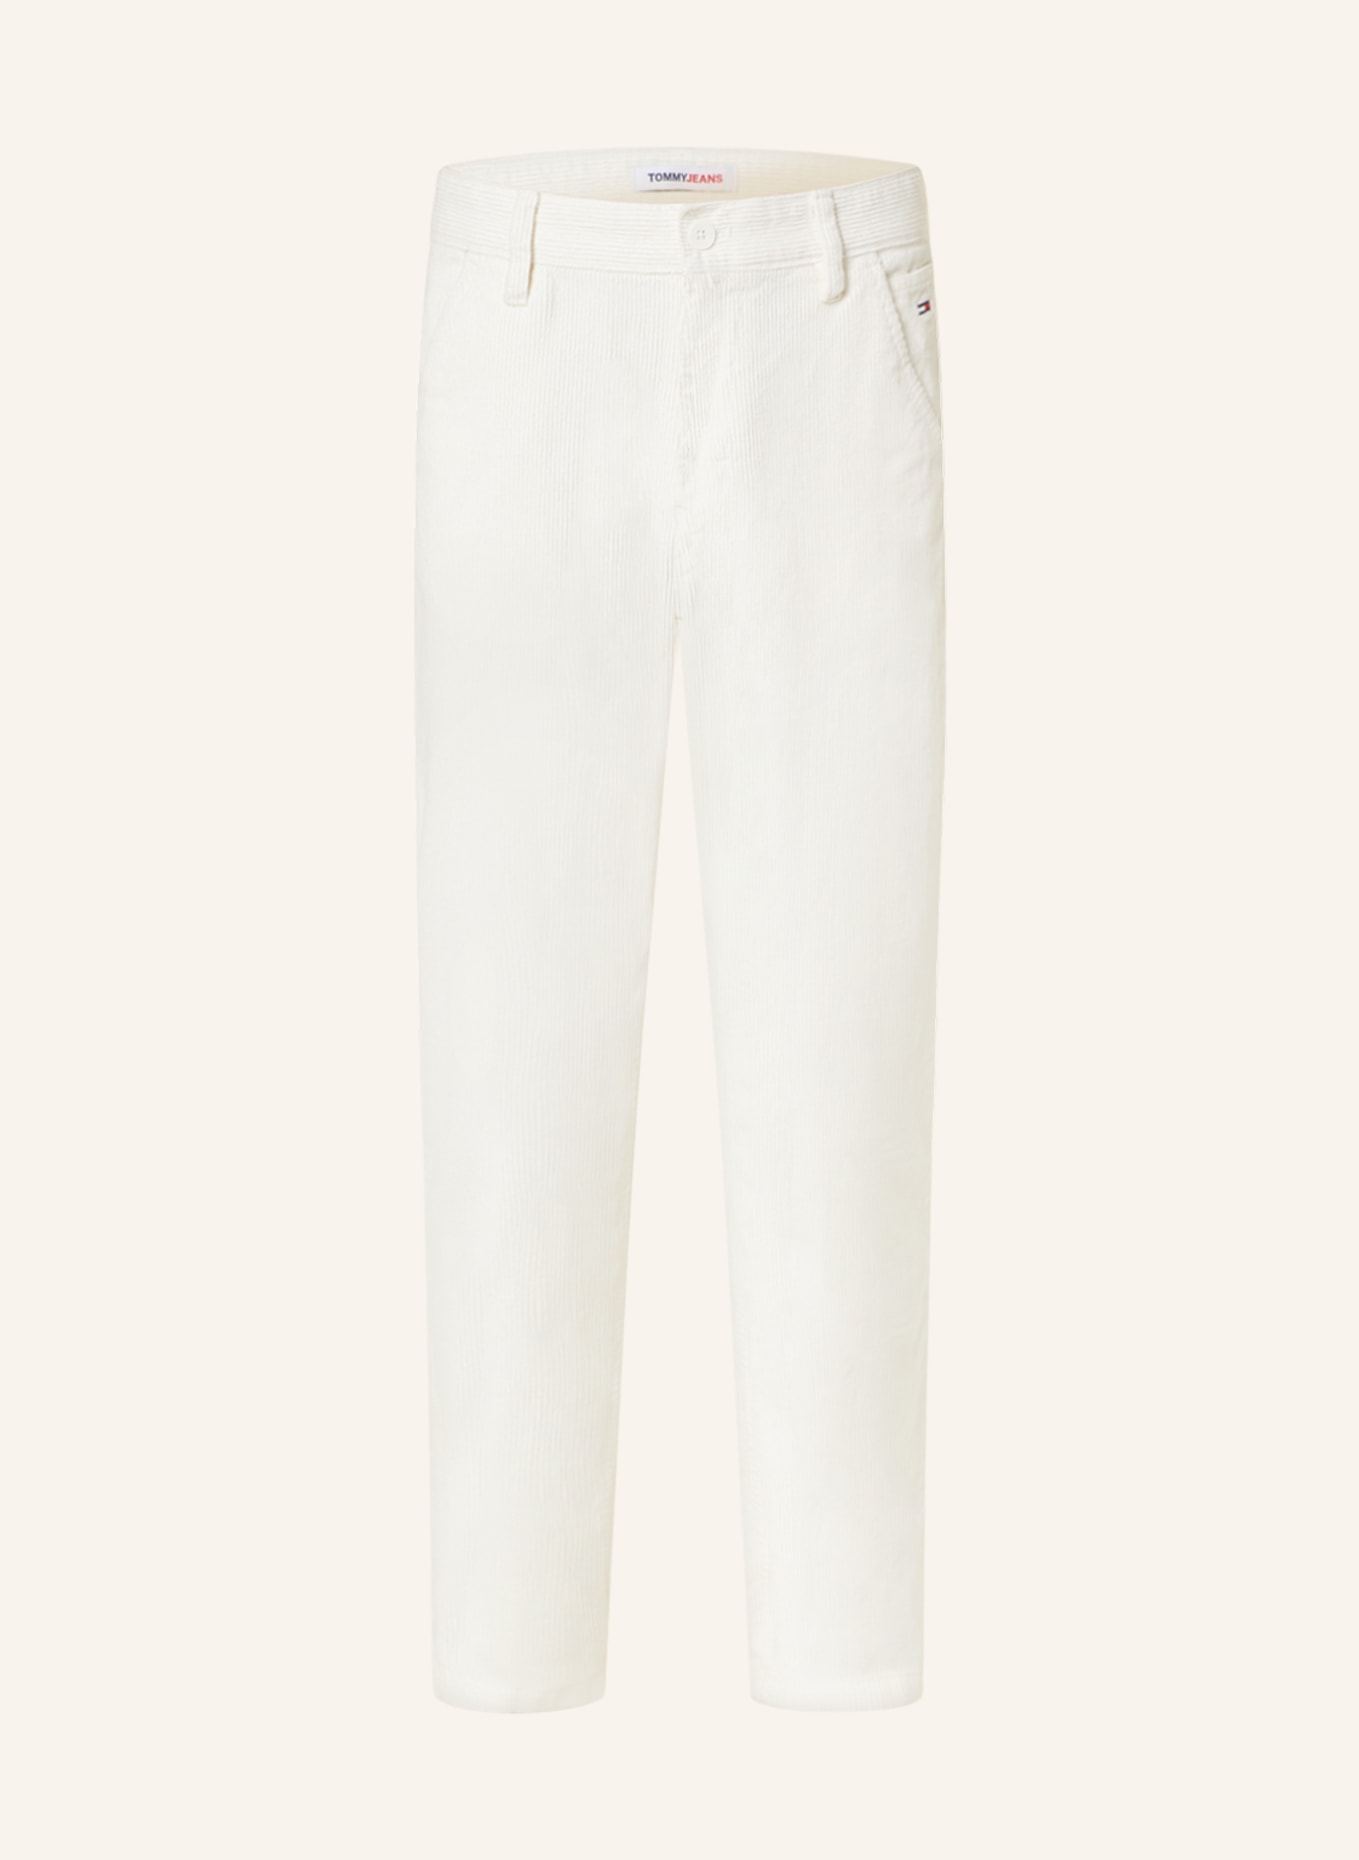 TOMMY JEANS Cordhose ETHAN Relaxed Straight Fit, Farbe: WEISS (Bild 1)